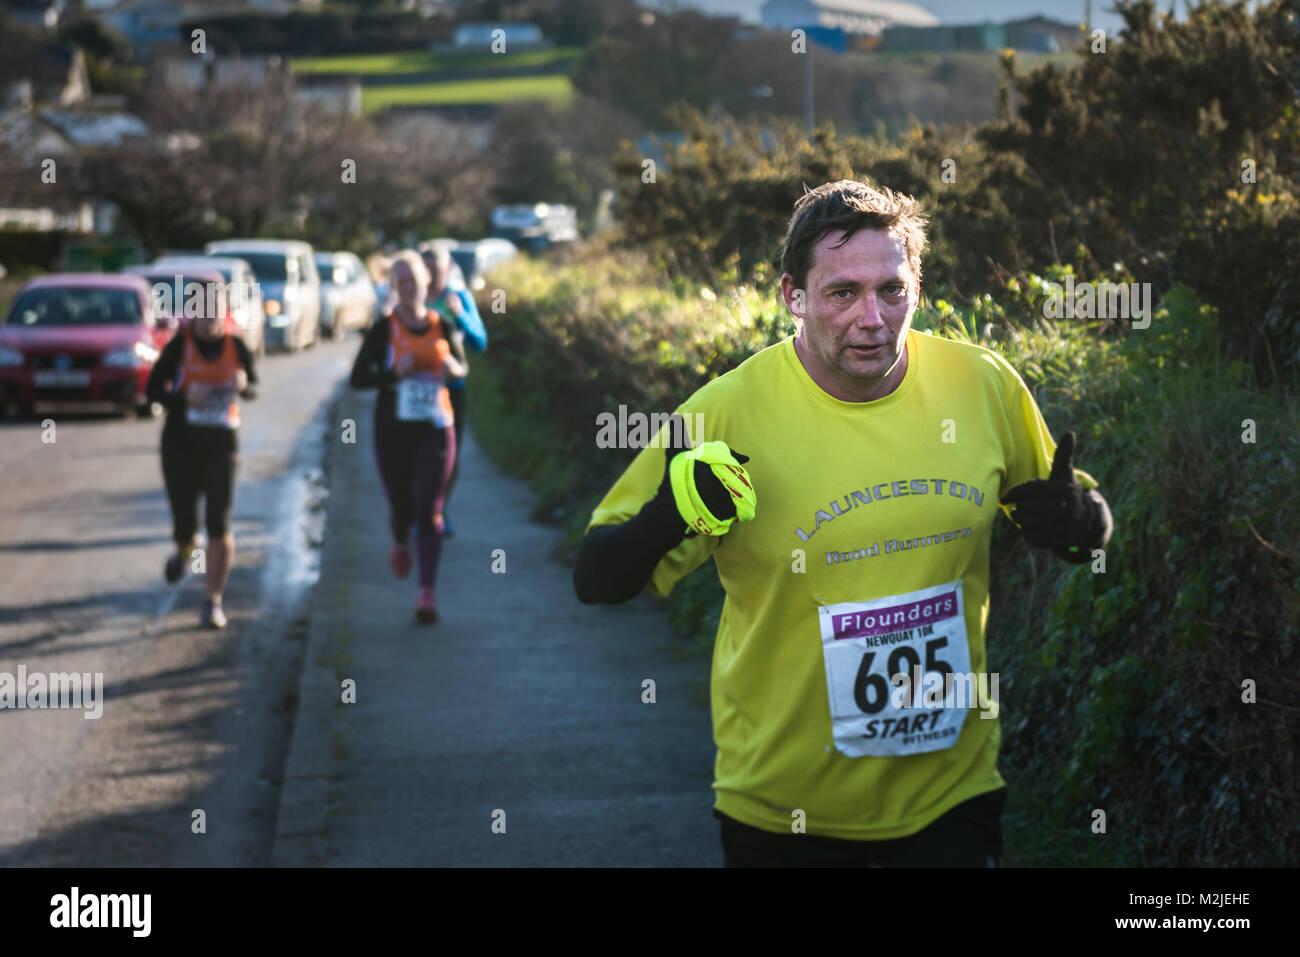 Runners competing in a road race in Newquay Cornwall. Stock Photo